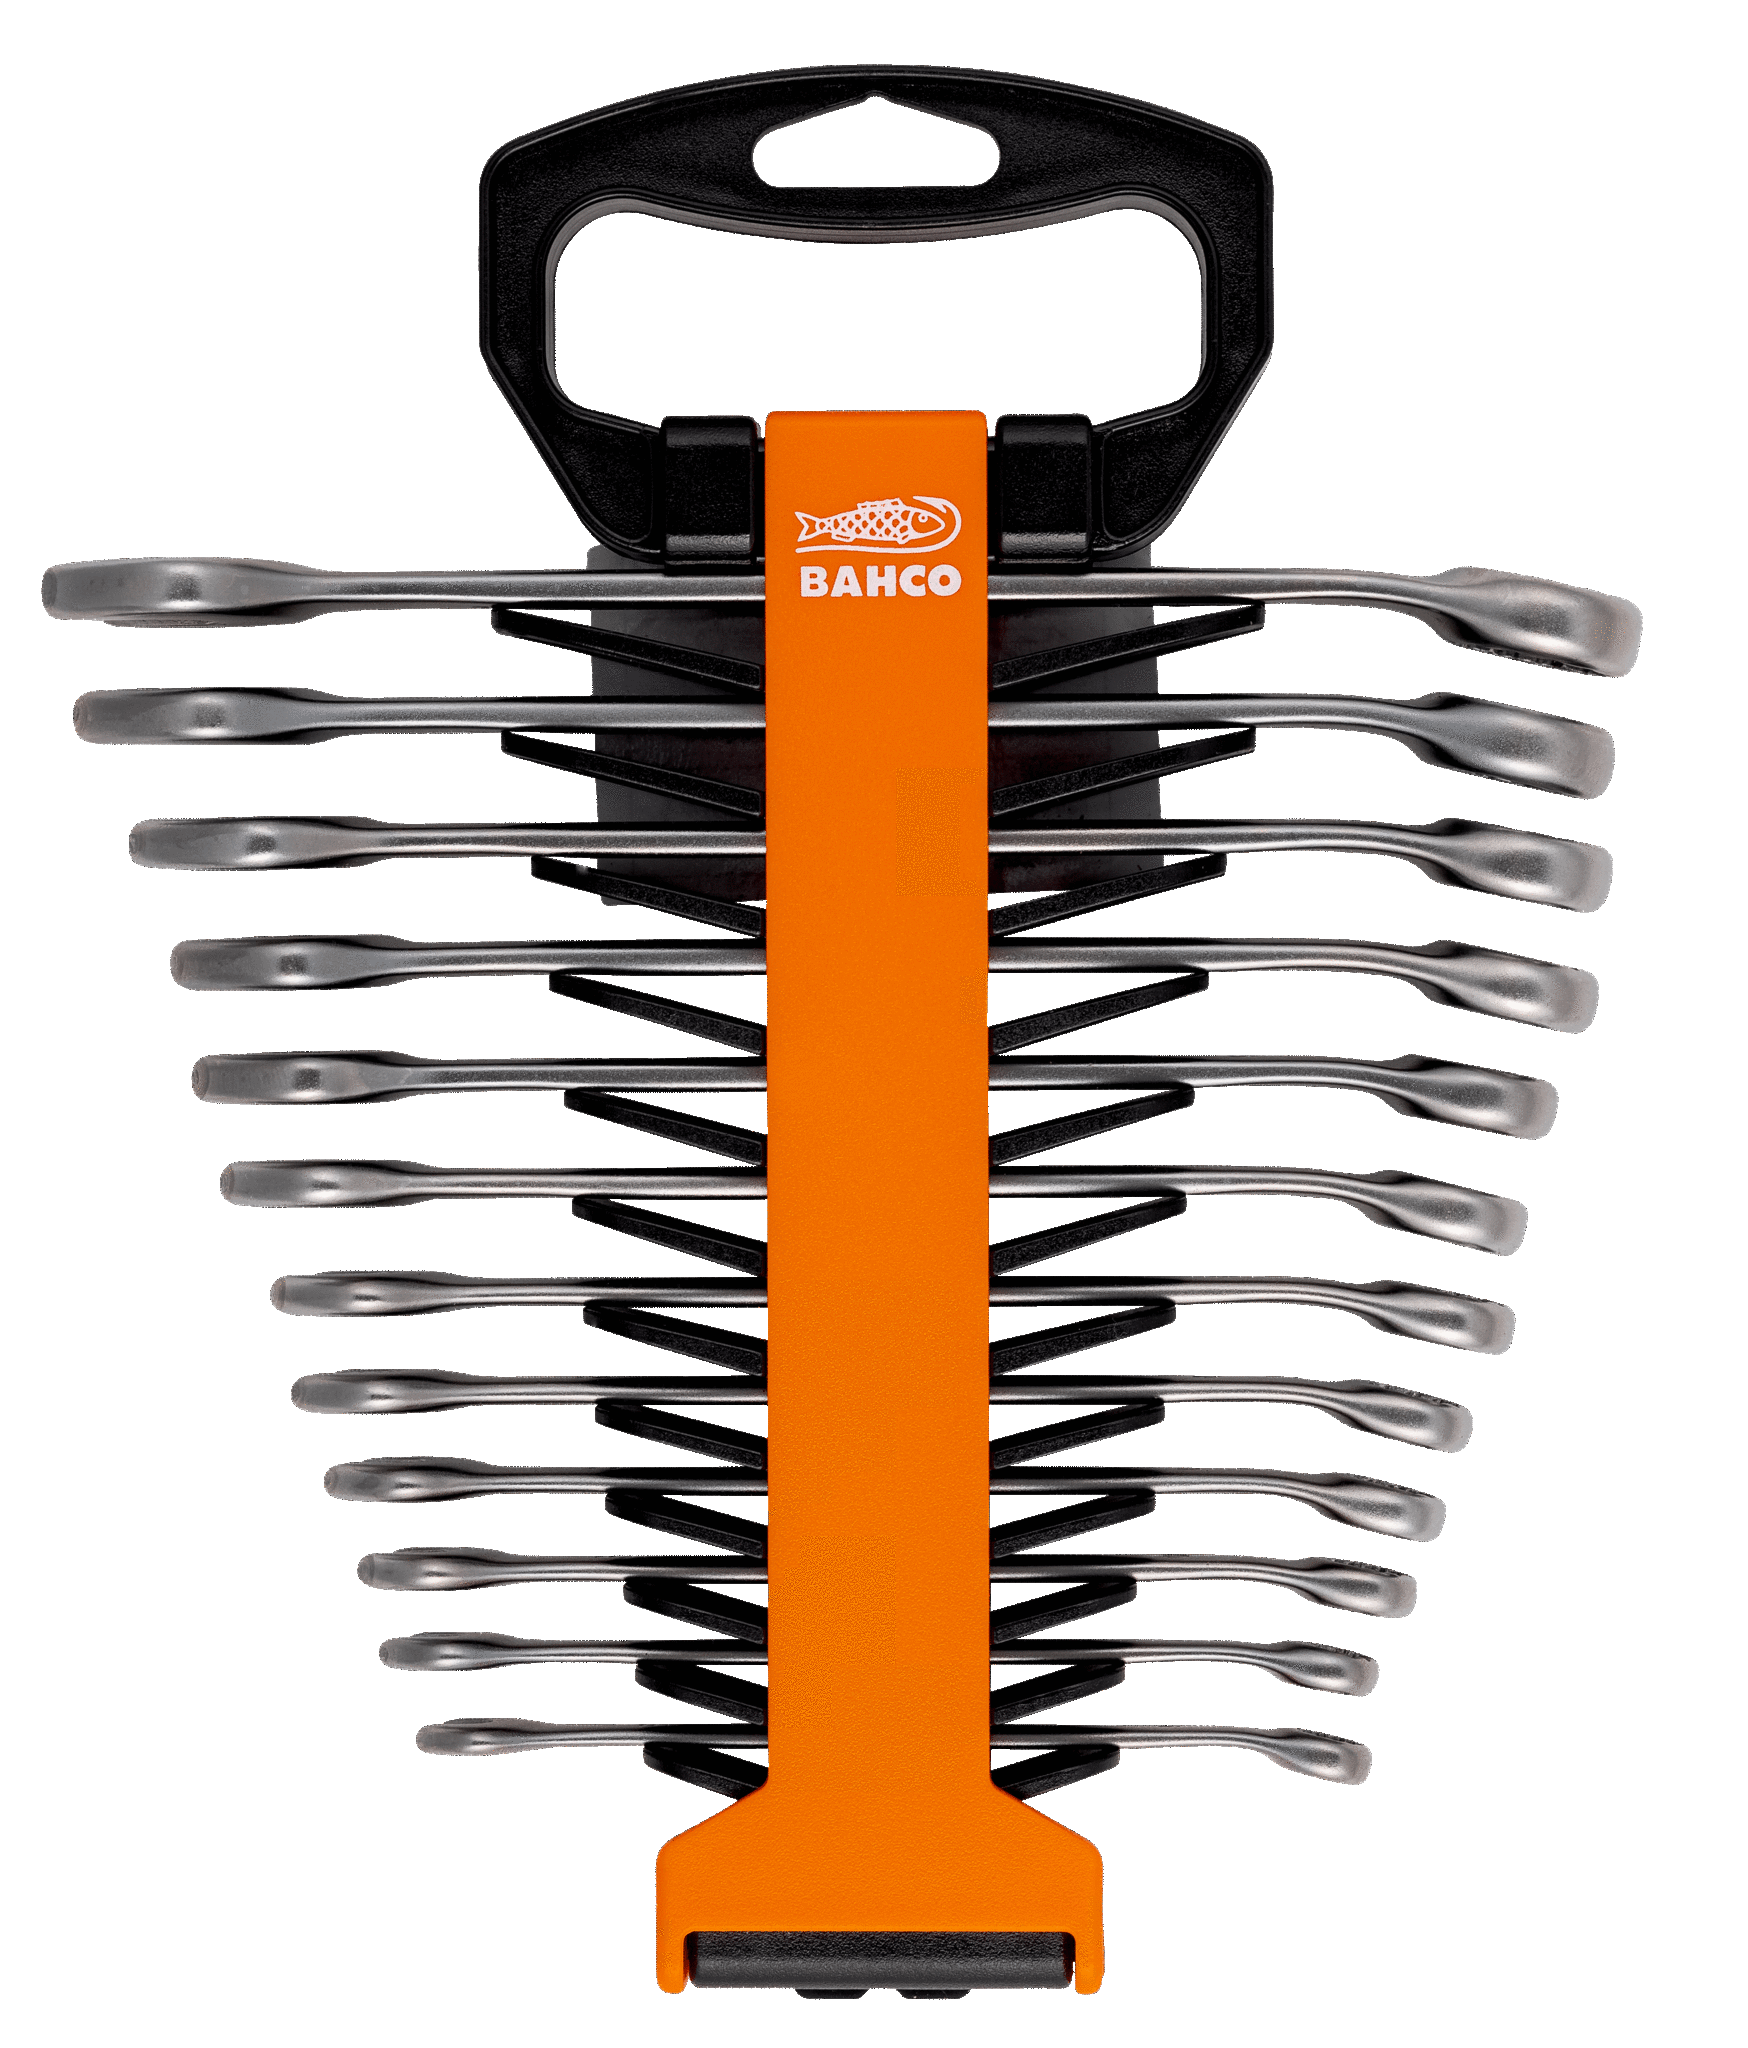 BAHCO 111M/SH12 Metric Flat Combination Wrench Set 9-18mm-12Pcs - Premium Flat Combination Wrench Set from BAHCO - Shop now at Yew Aik.